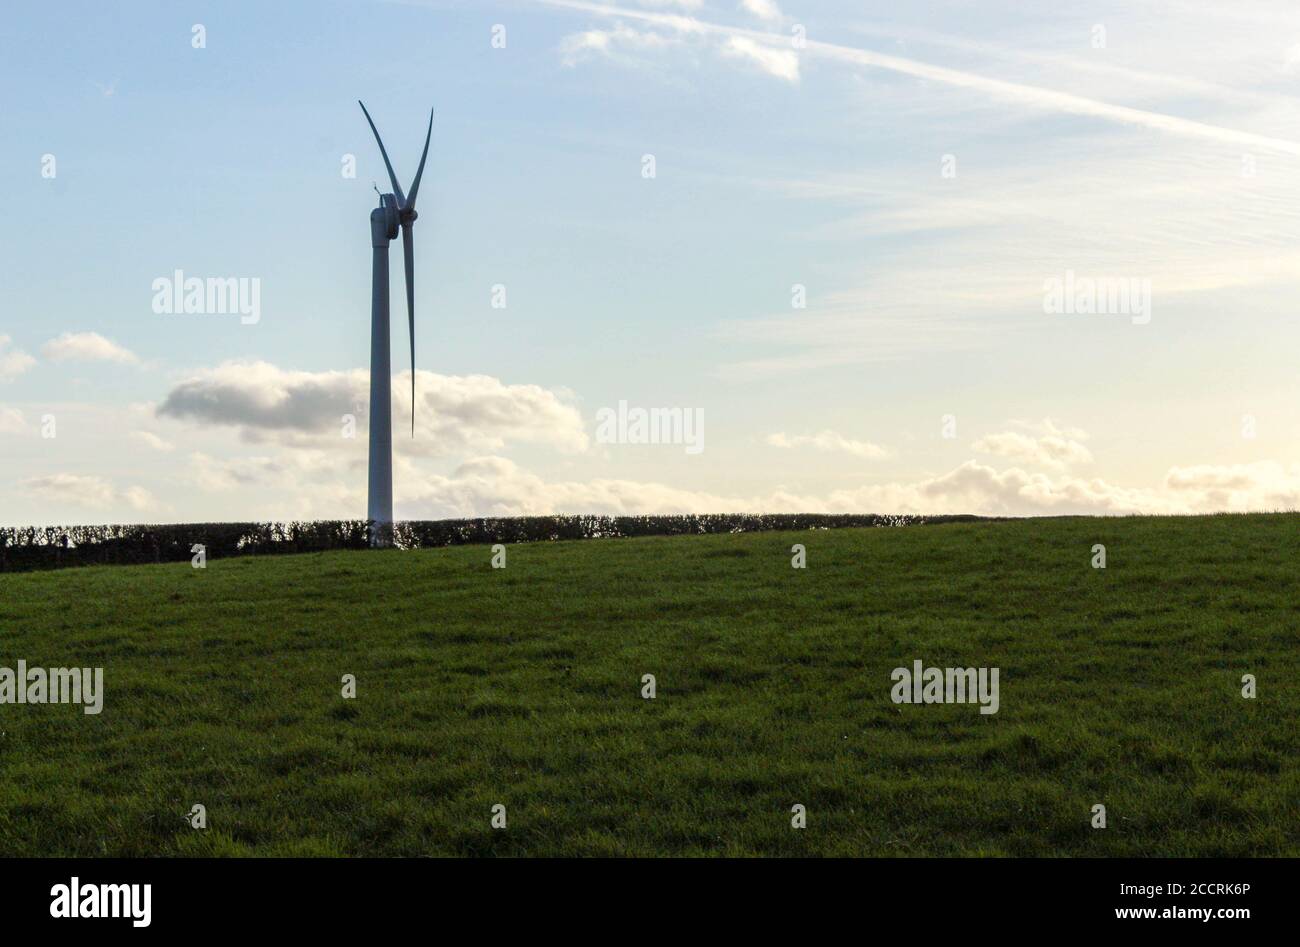 Wind turbine in an agricultural field Stock Photo